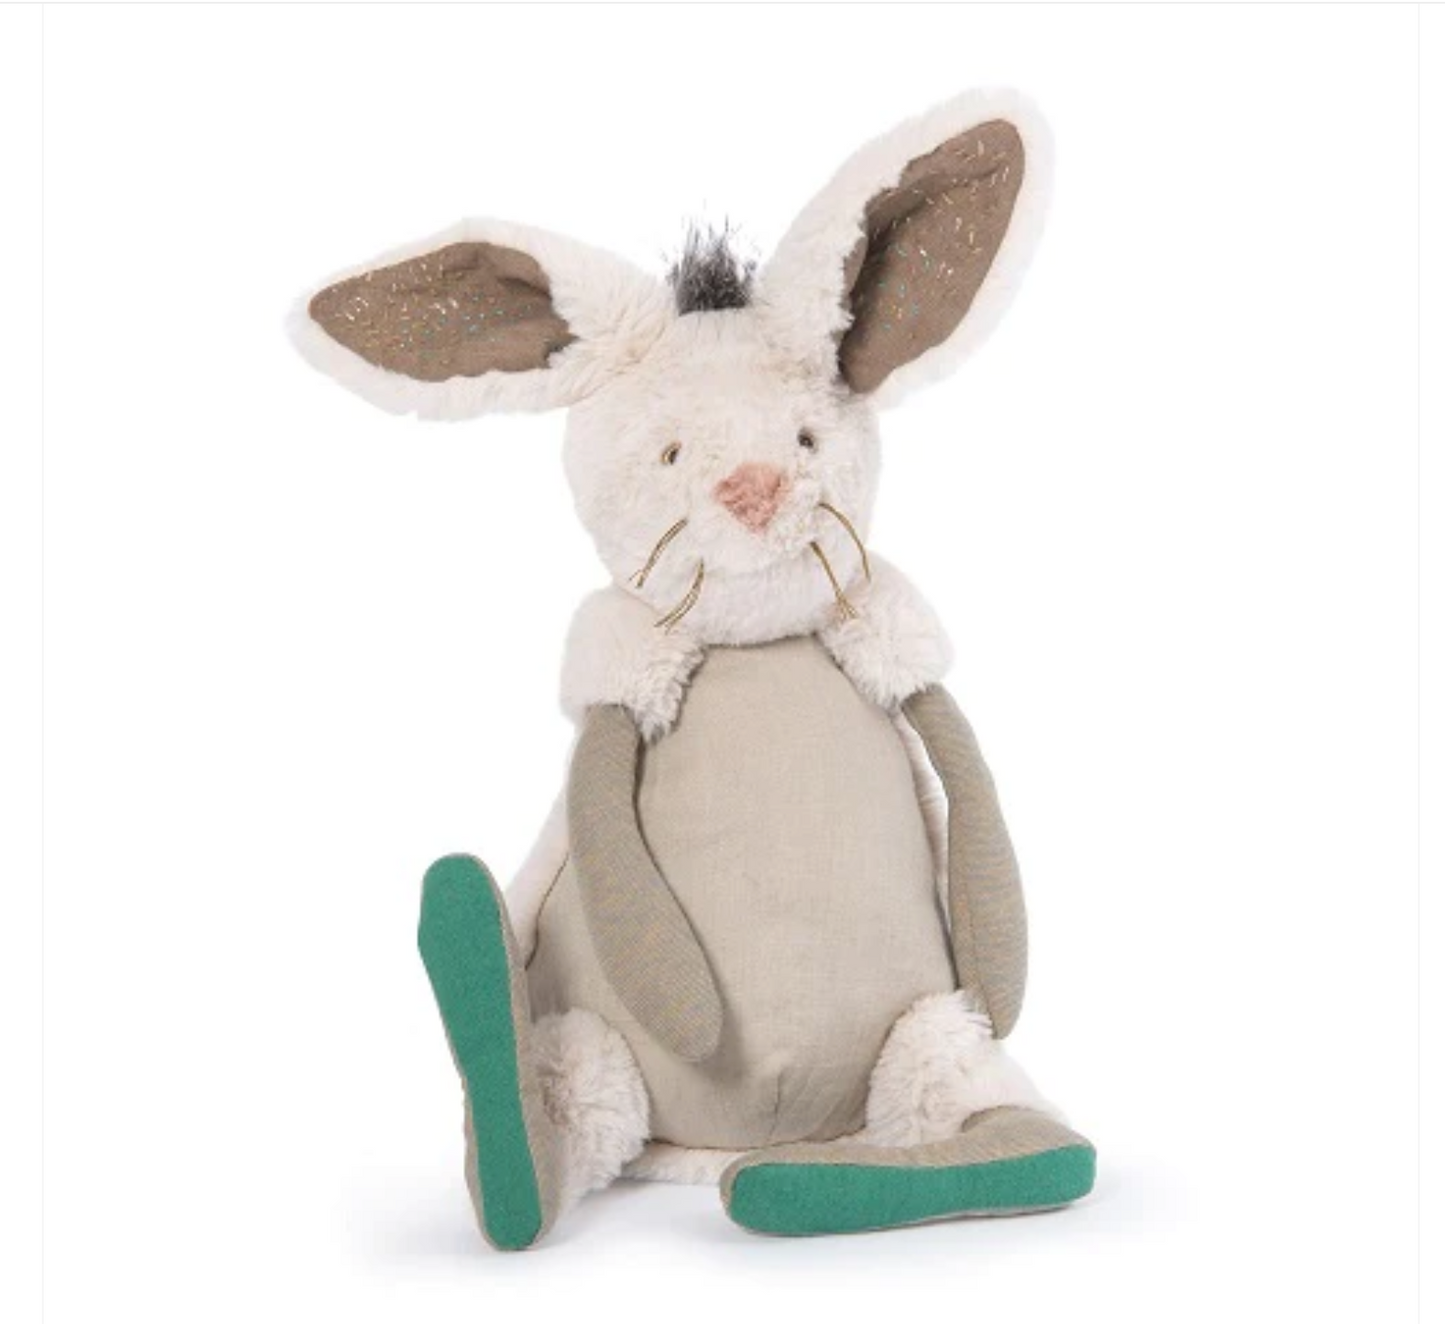 Neige rabbit soft toy By Moulin Roty & Cecile Blindermann